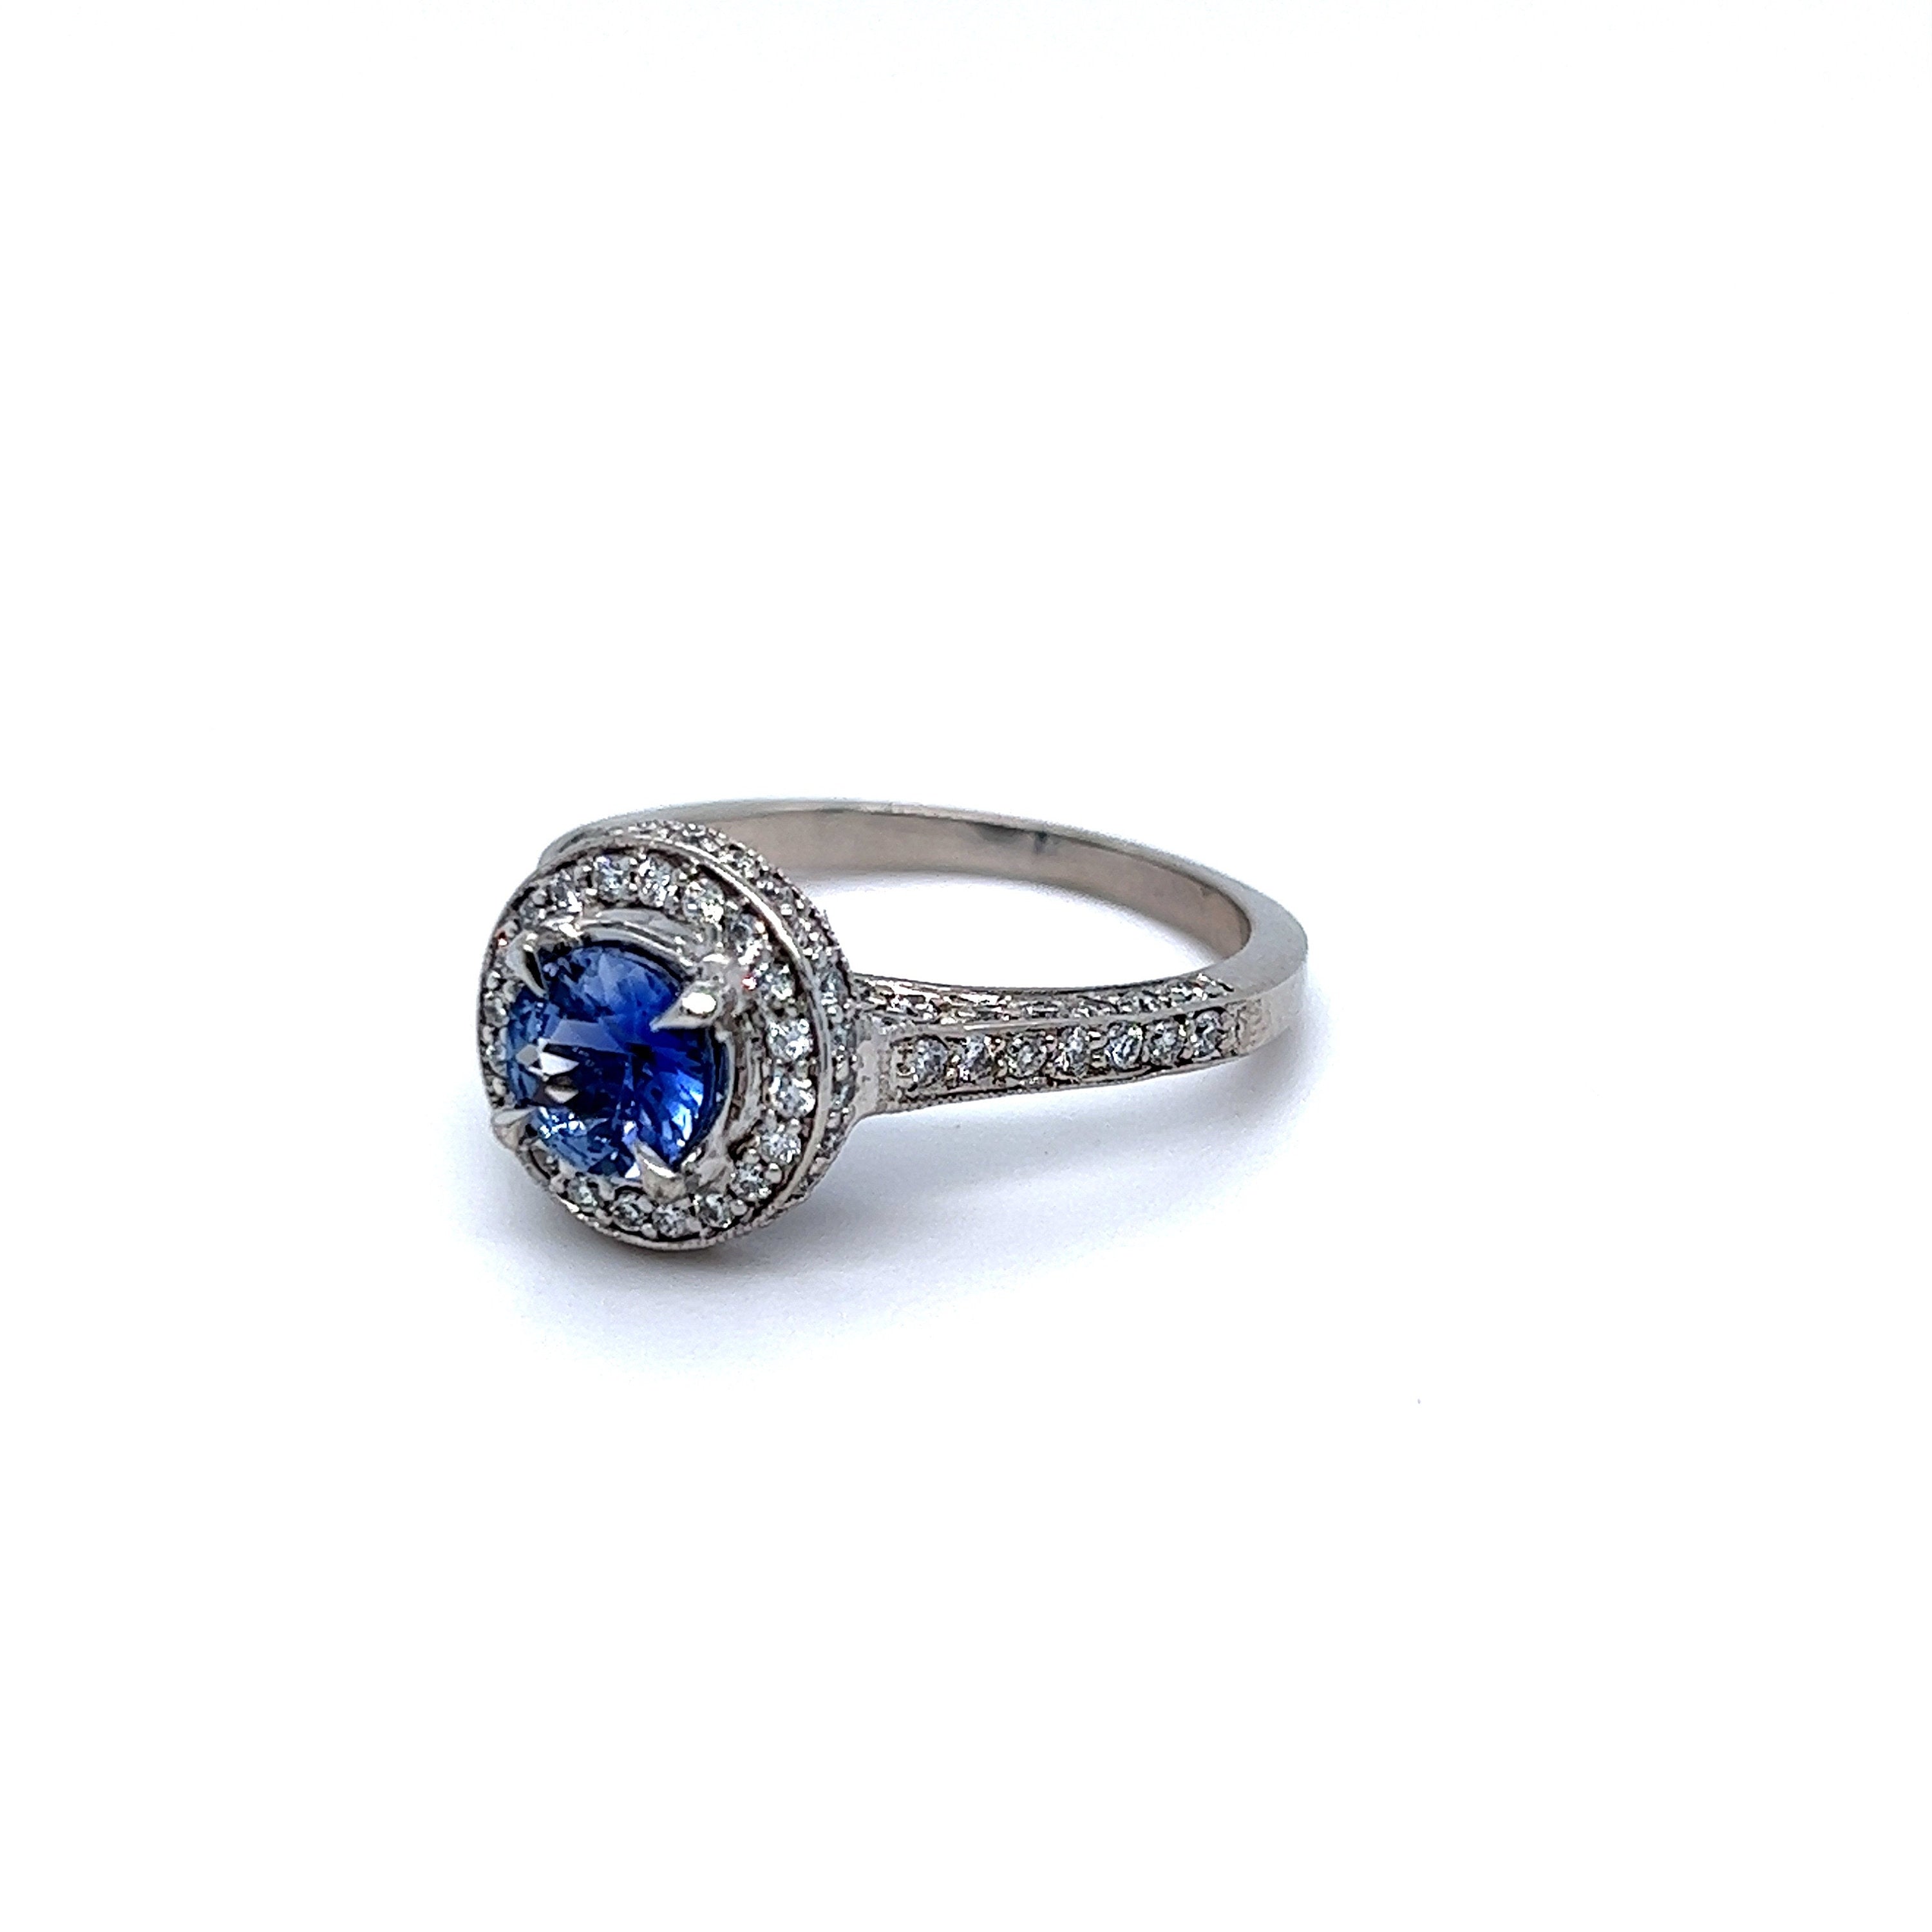 Gorgeous Vintage 14K White Gold Ceylon Sapphire Engagement Ring with Pave Diamonds - 2.93ct.